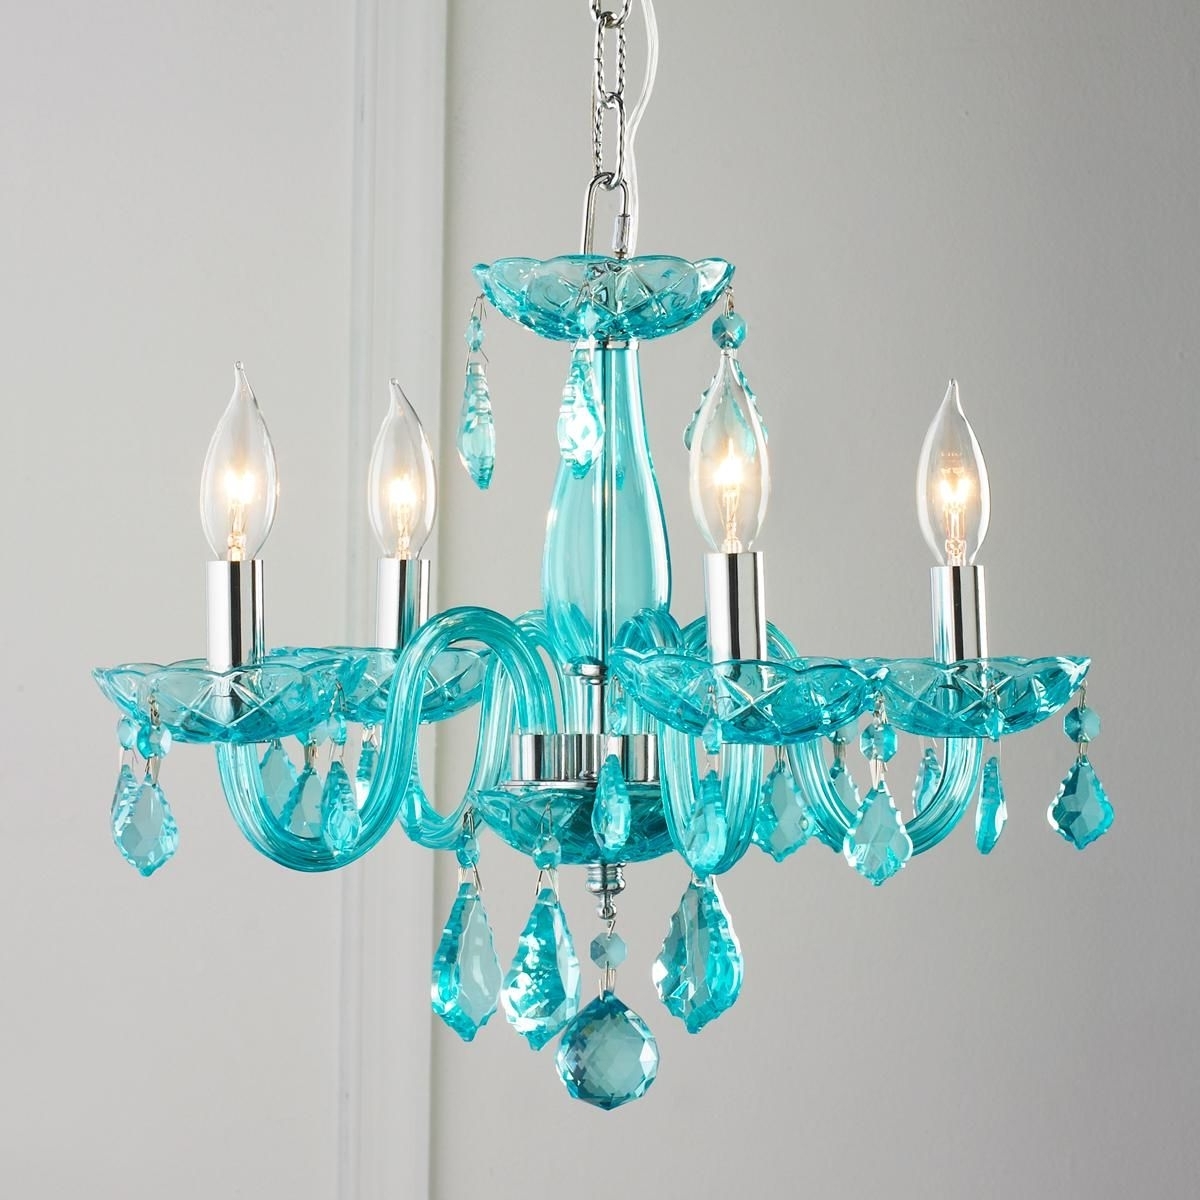 Turquoise Color Chandeliers